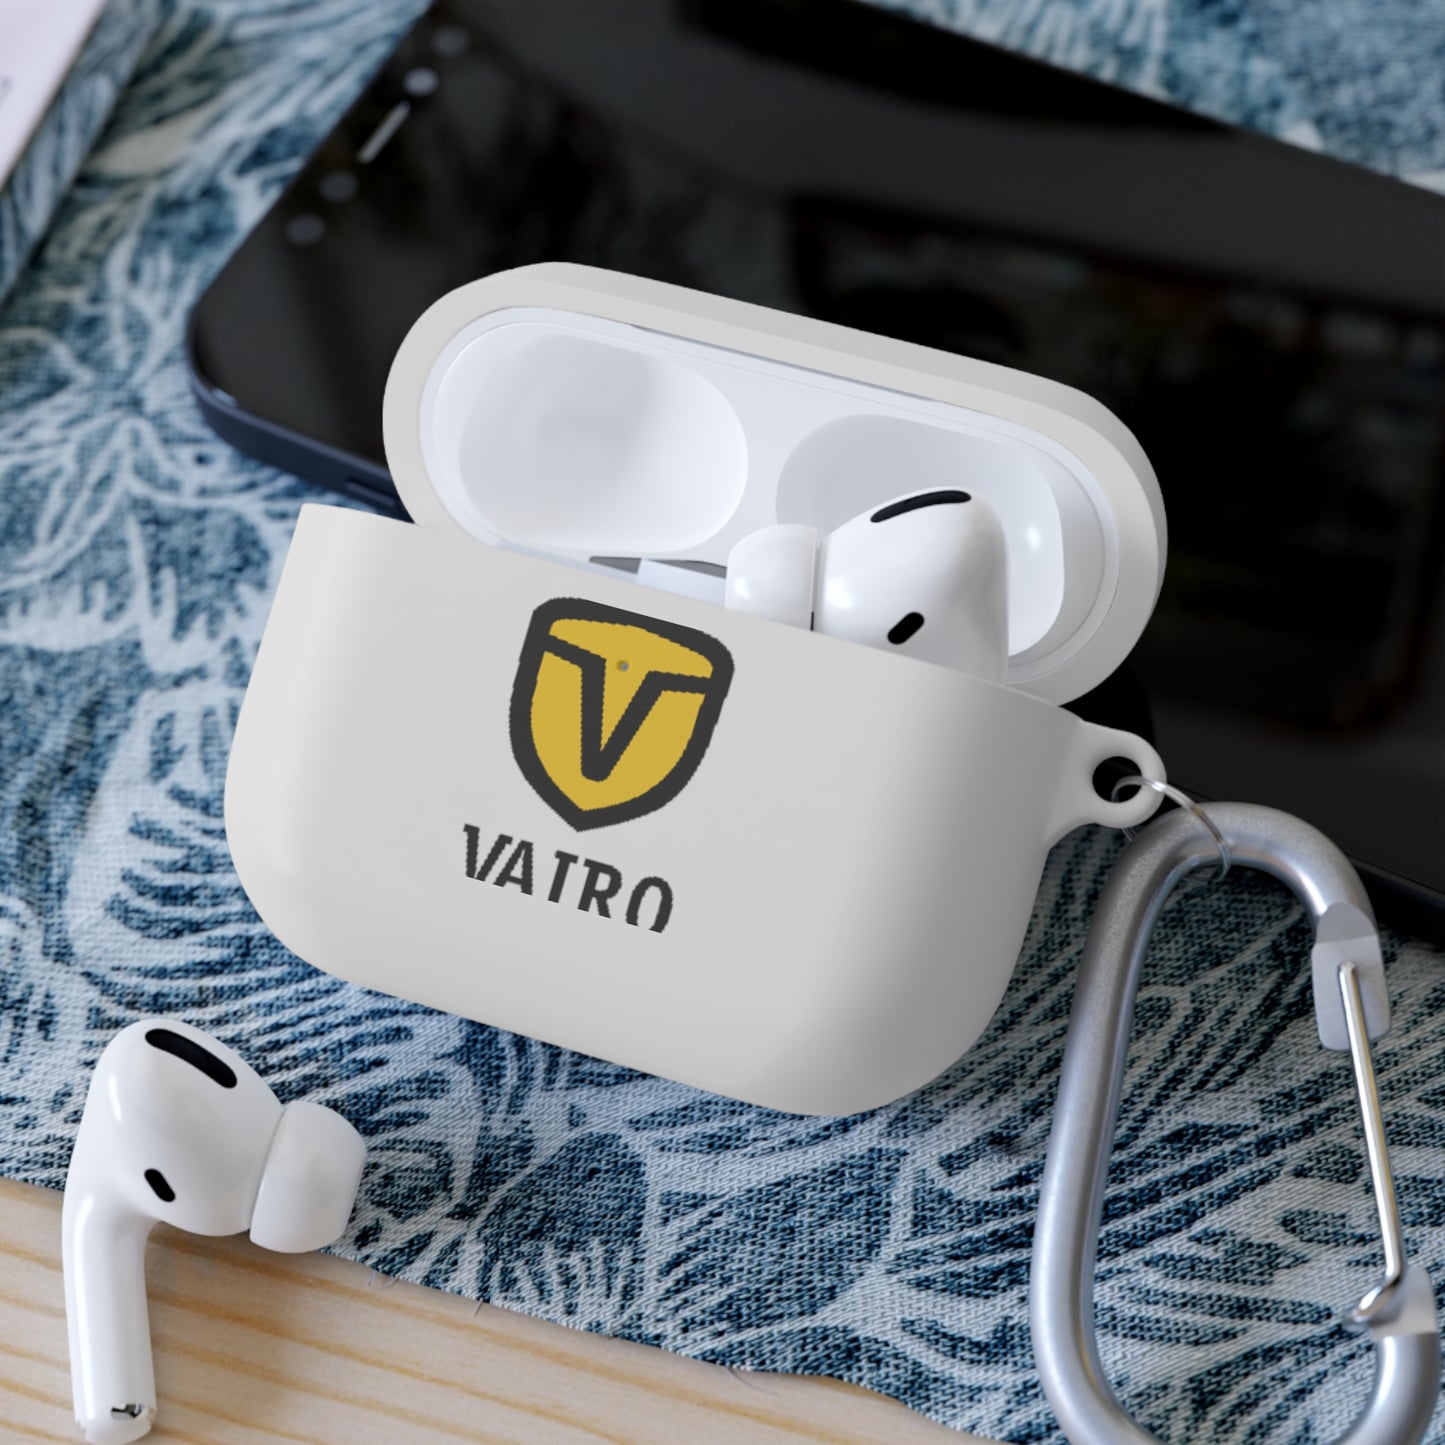 Vairo AirPods and AirPods Pro Case Cover